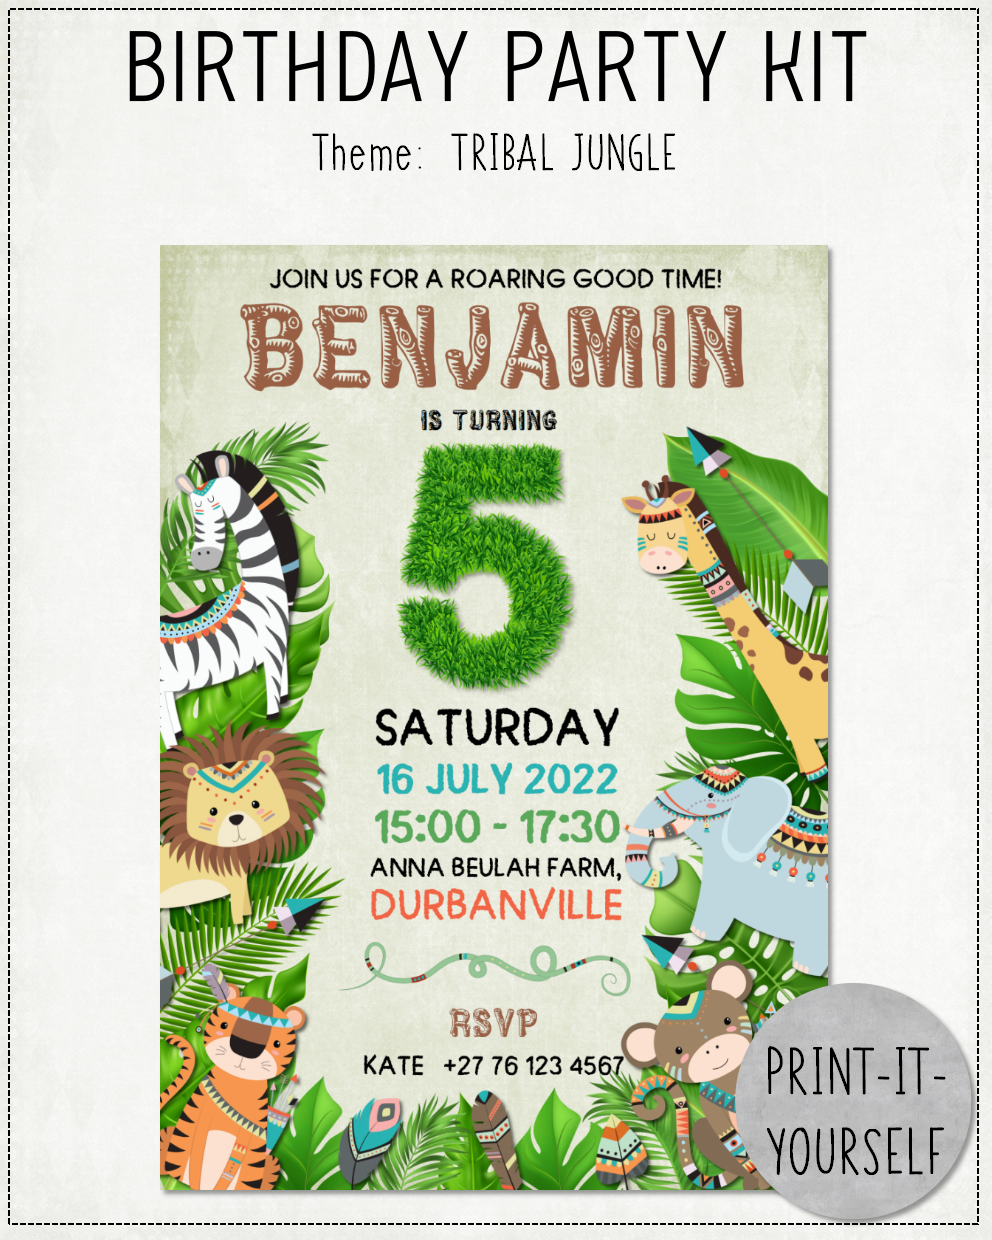 PRINT-IT-YOURSELF KIT:  Birthday Party - Tribal Jungle